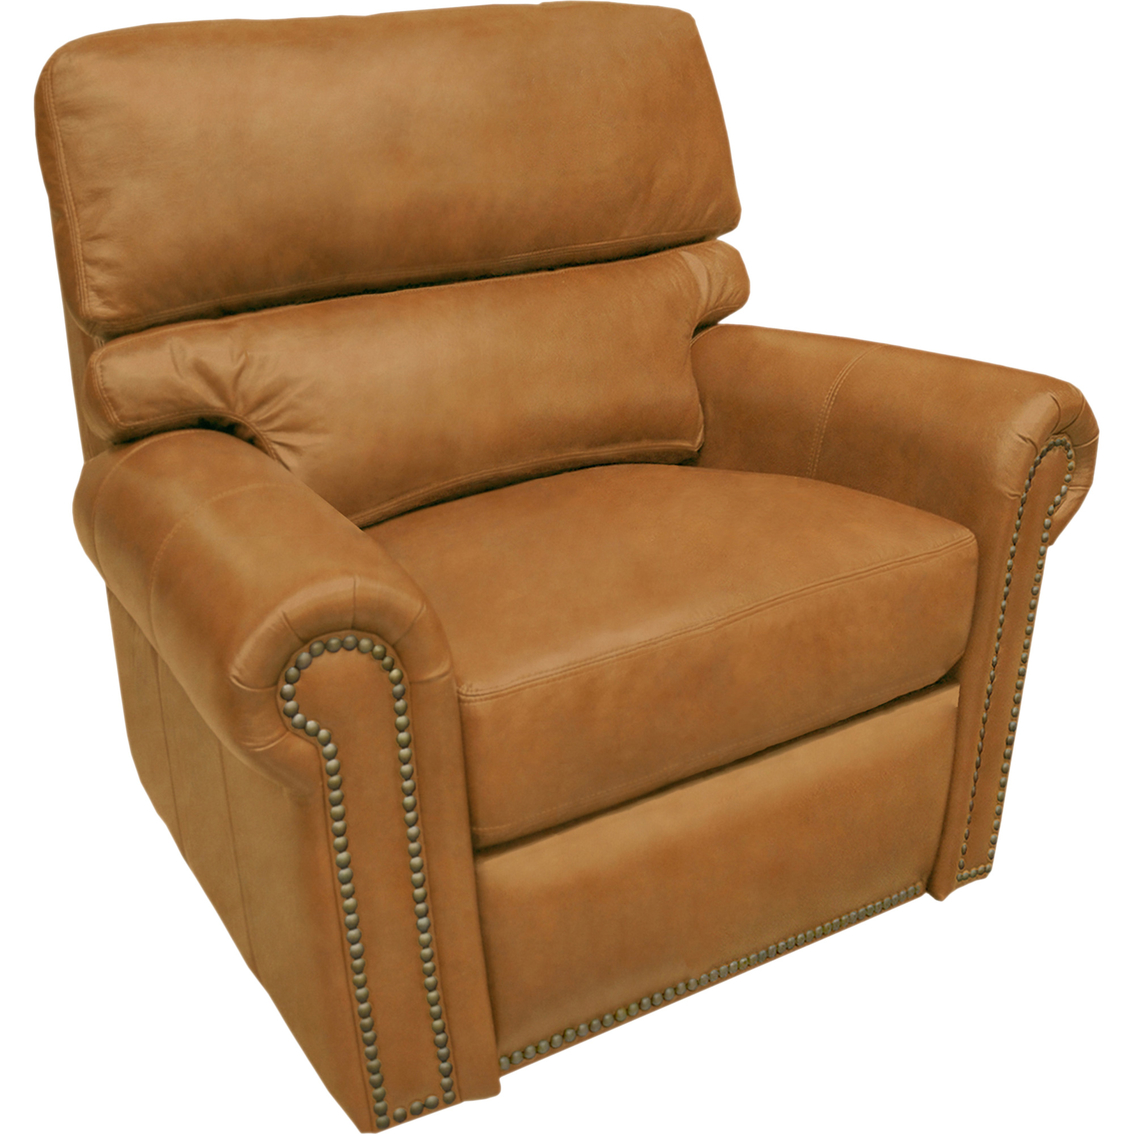 Omnia Italian Connor Bc Top Grain Leather Recliner Chairs